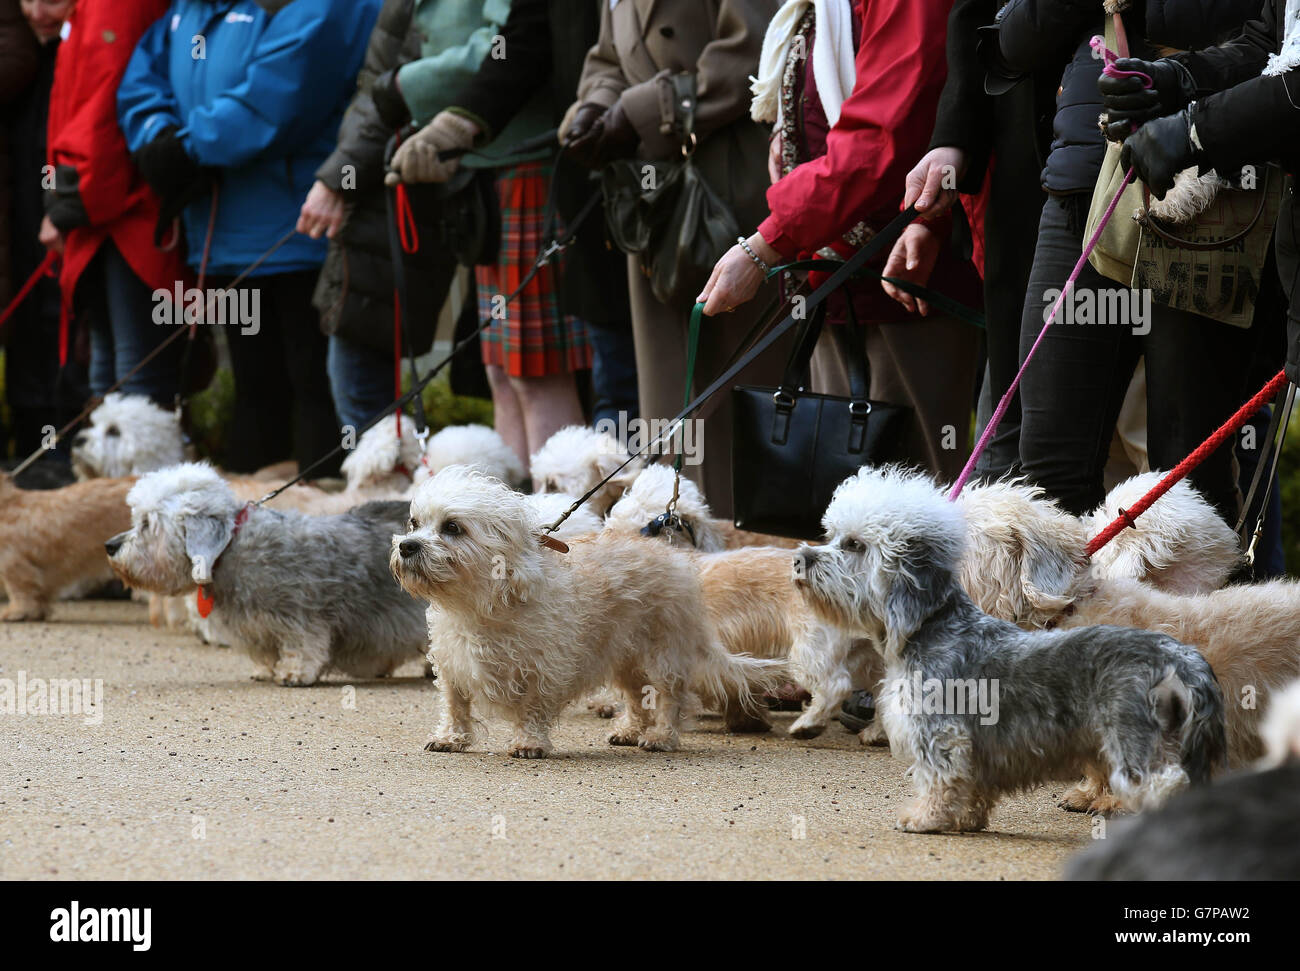 75 breed dedicated enthusiasts from eight different countries parade 50 rare and endangered Dandie Dinmont Terriers, as they visit Sir Walter Scott's home at Abbotsford, Melrose, in the Scottish Borders, on the 200th anniversary of the publication of the book Guy Mannering which gave the breed its distinctive name. Stock Photo